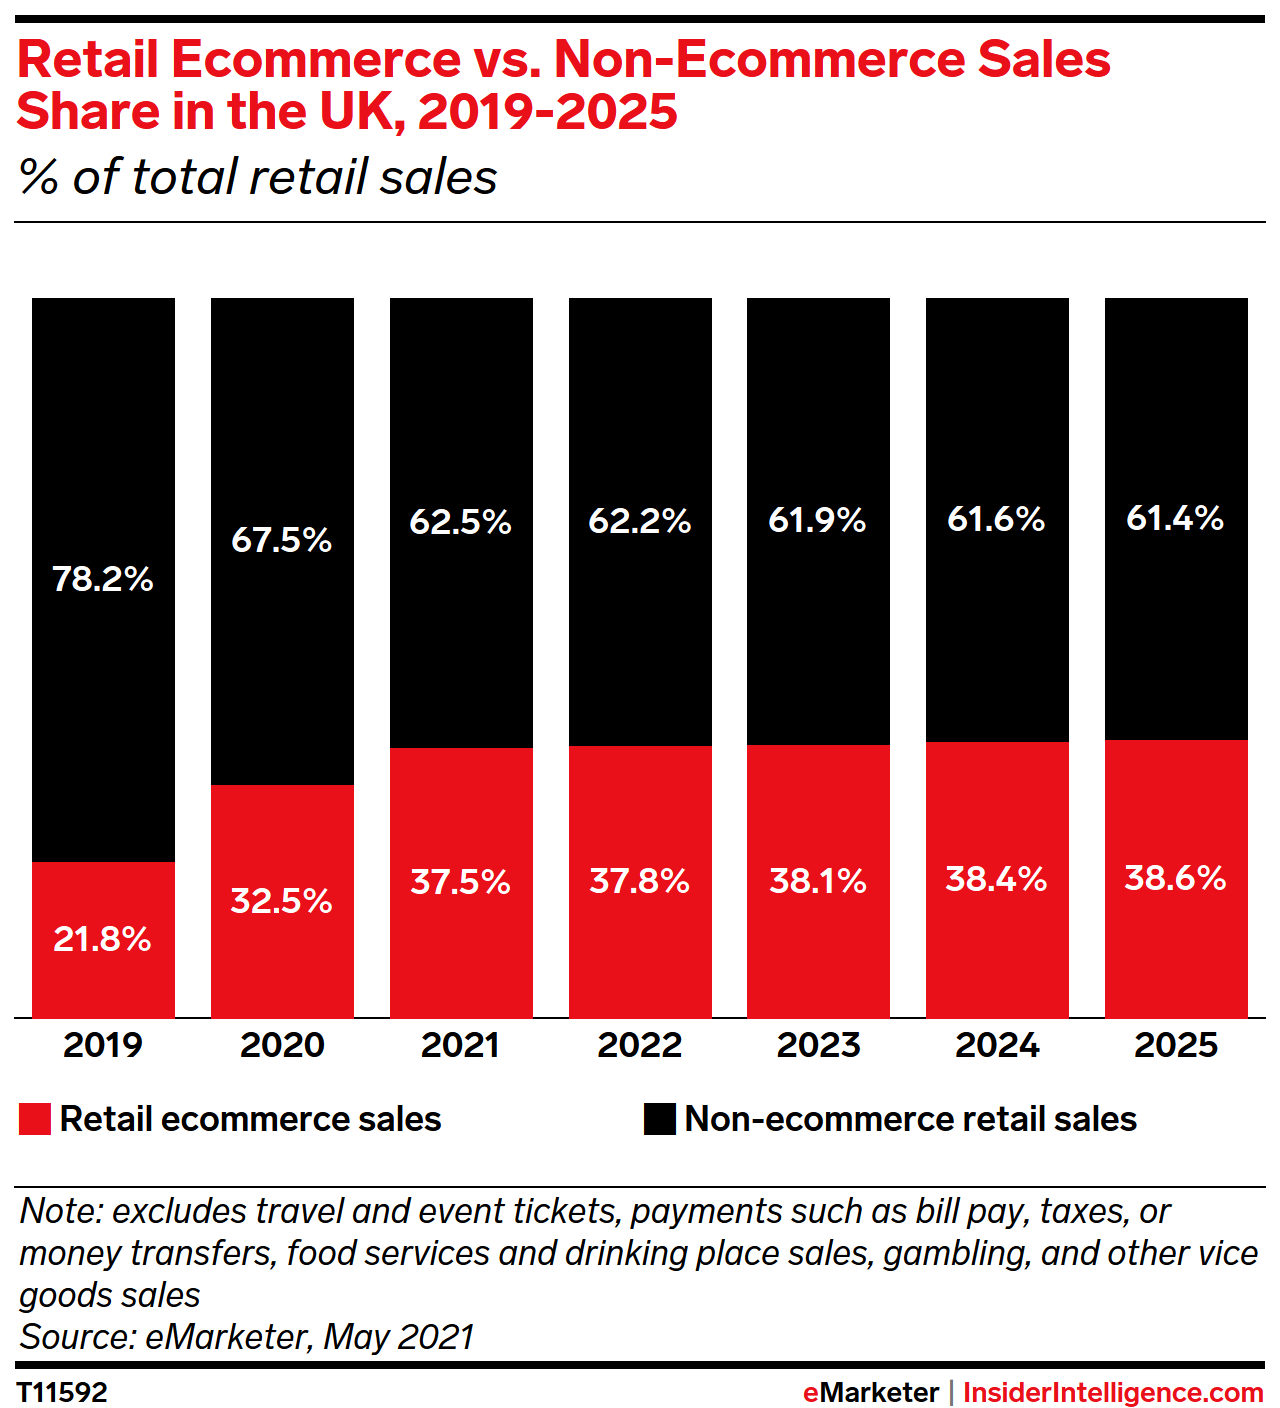 Retail Ecommerce vs. Non-Ecommerce Sales Share in the UK, 2019-2025 (% of total retail sales)